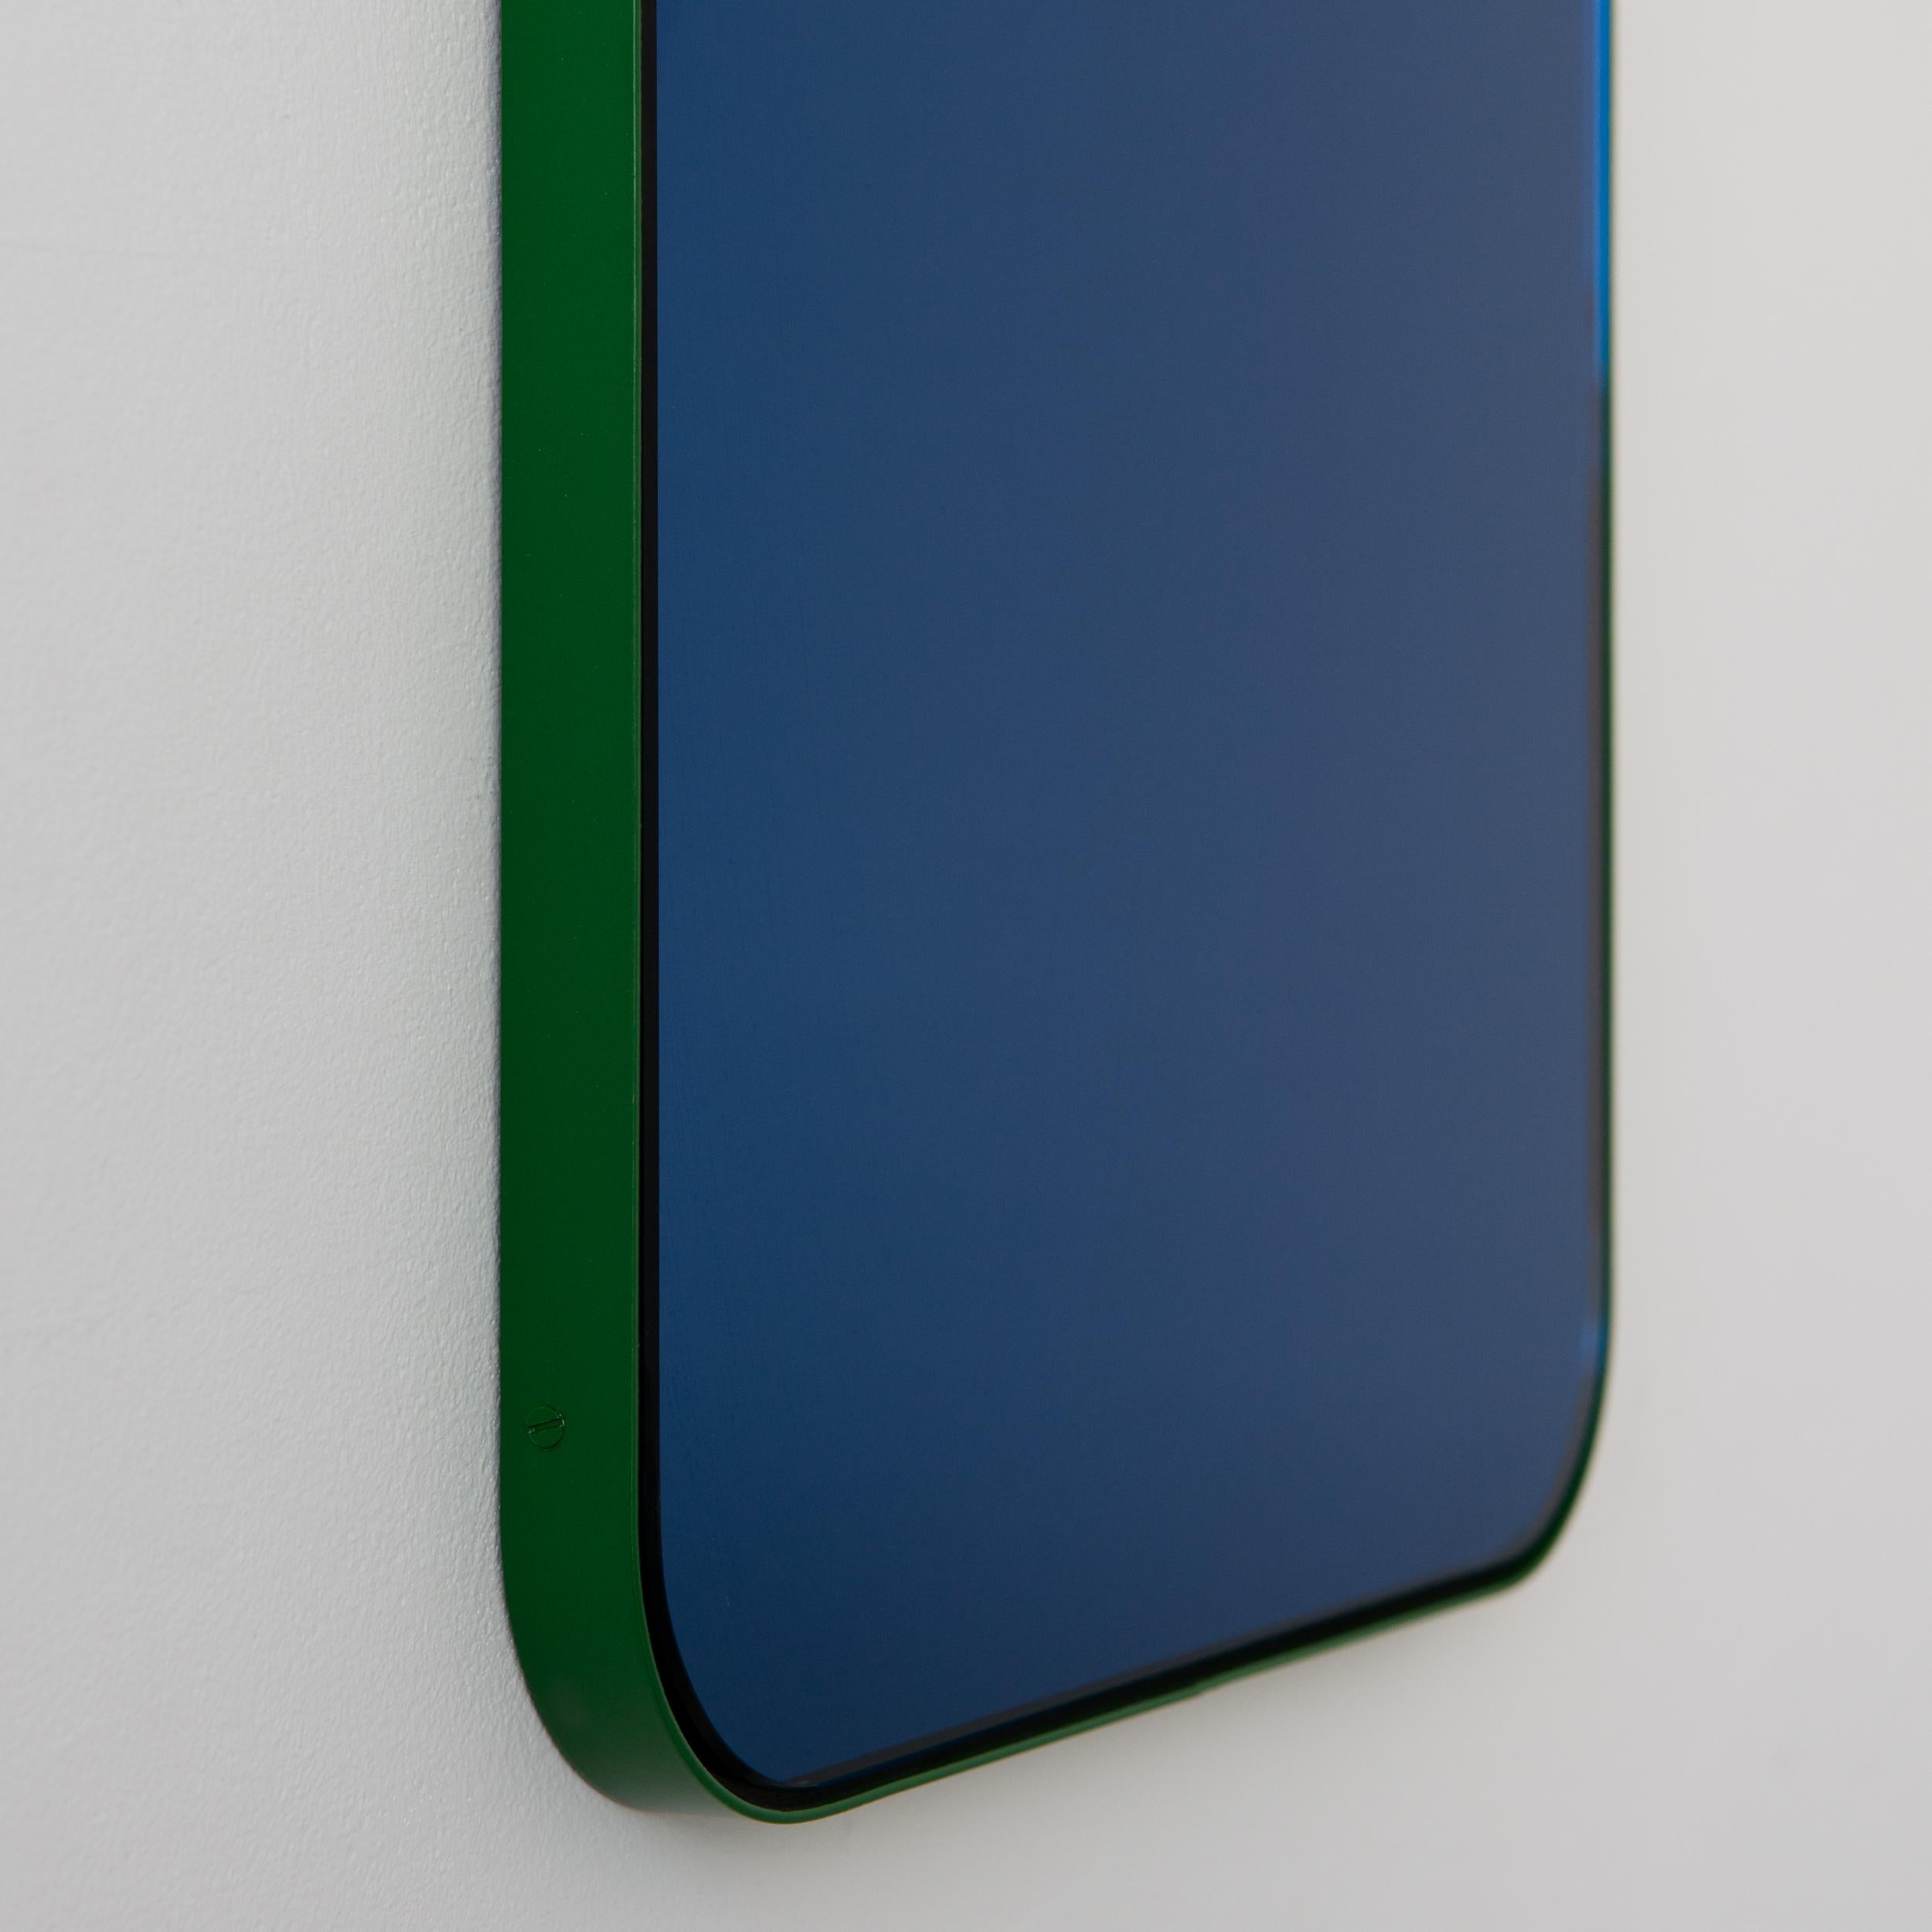 British Quadris Rectangular Contemporary Blue Mirror with a Modern Green Frame, Large For Sale